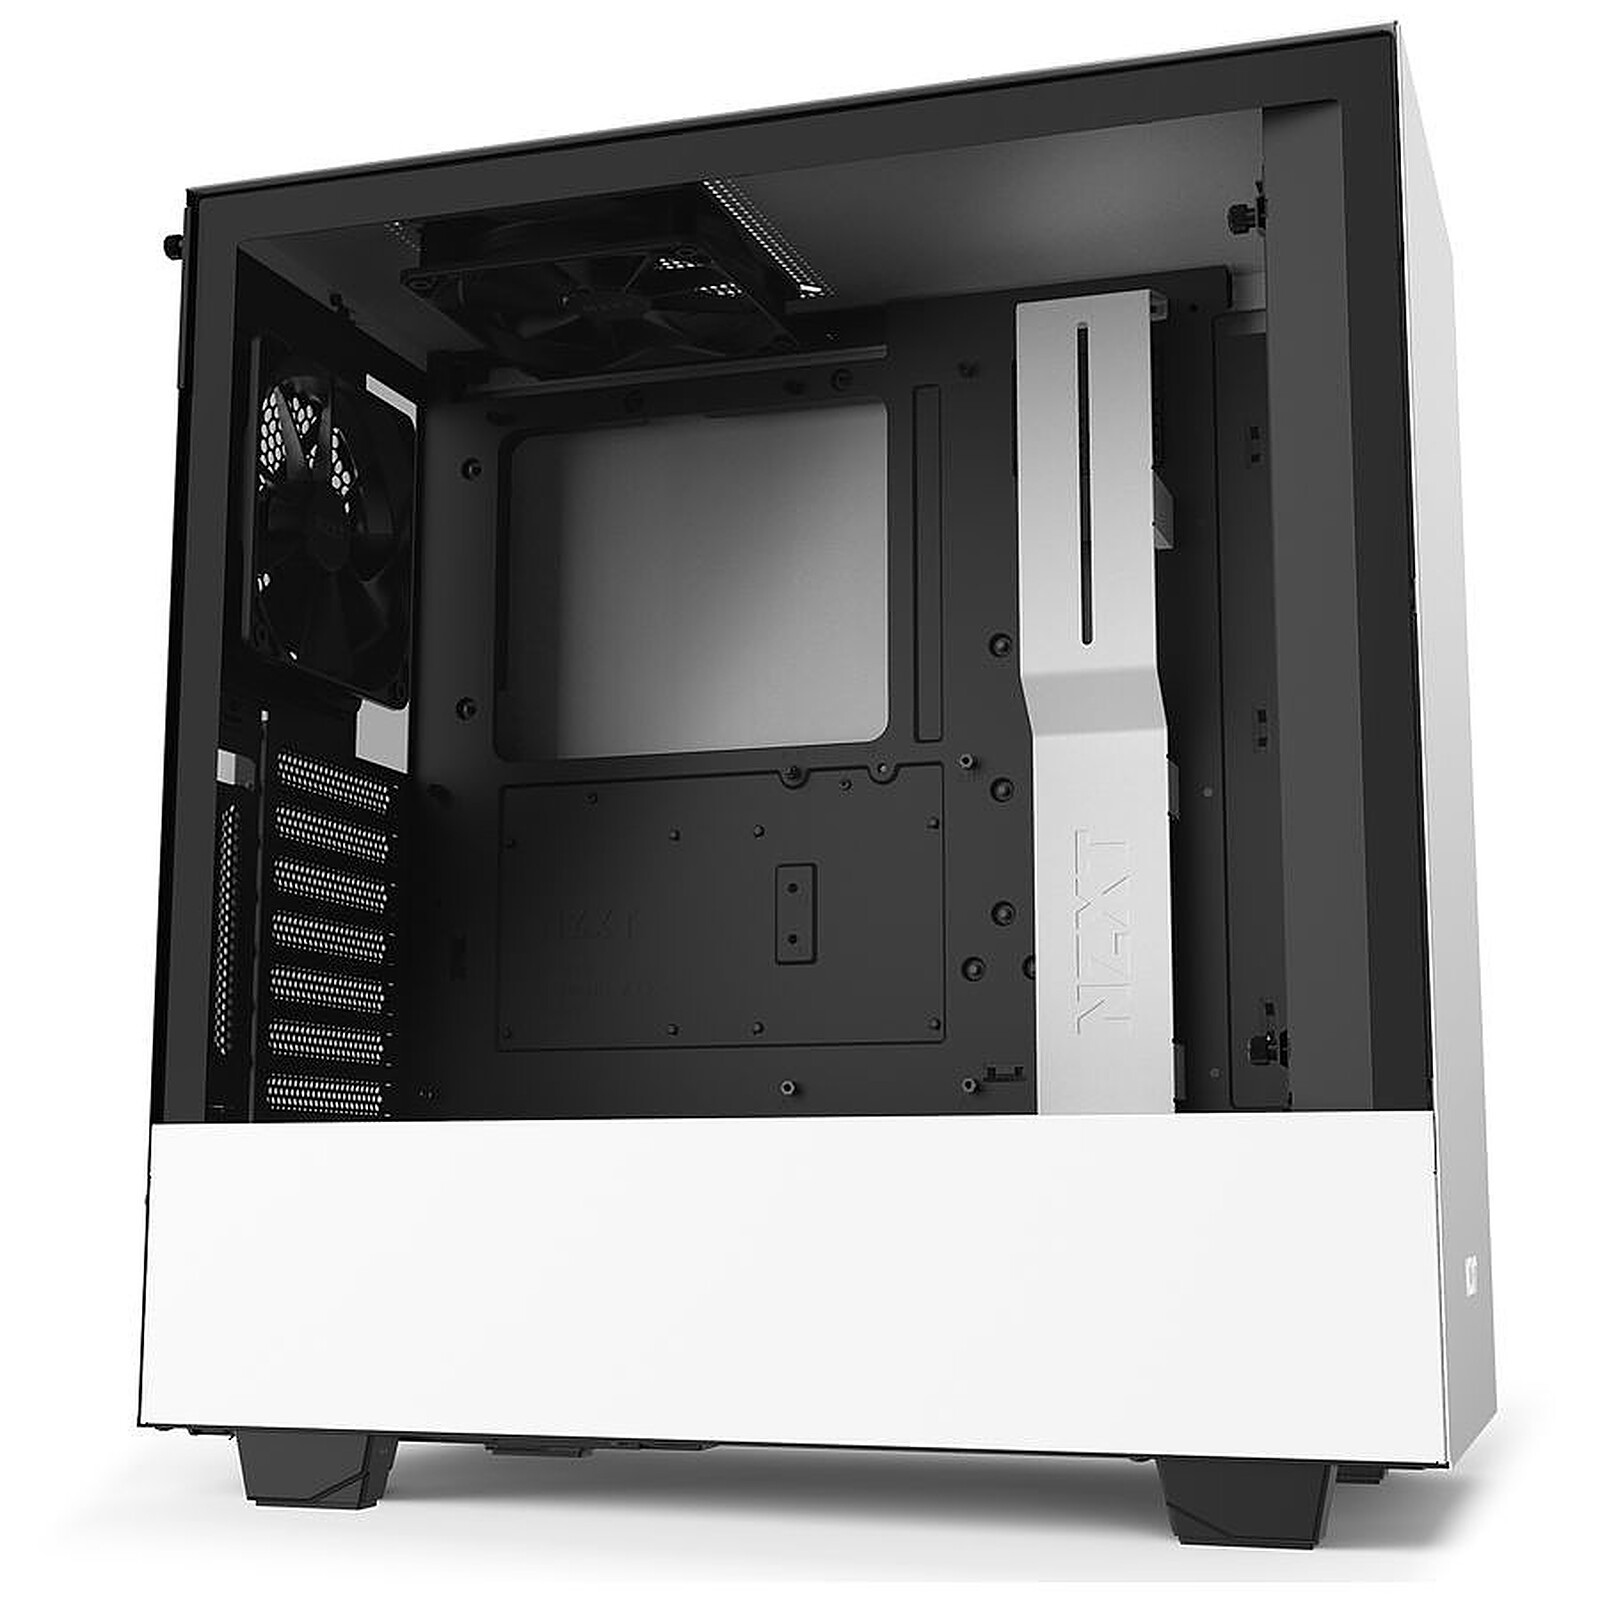 NZXT H510i White - PC cases - LDLC 3-year warranty